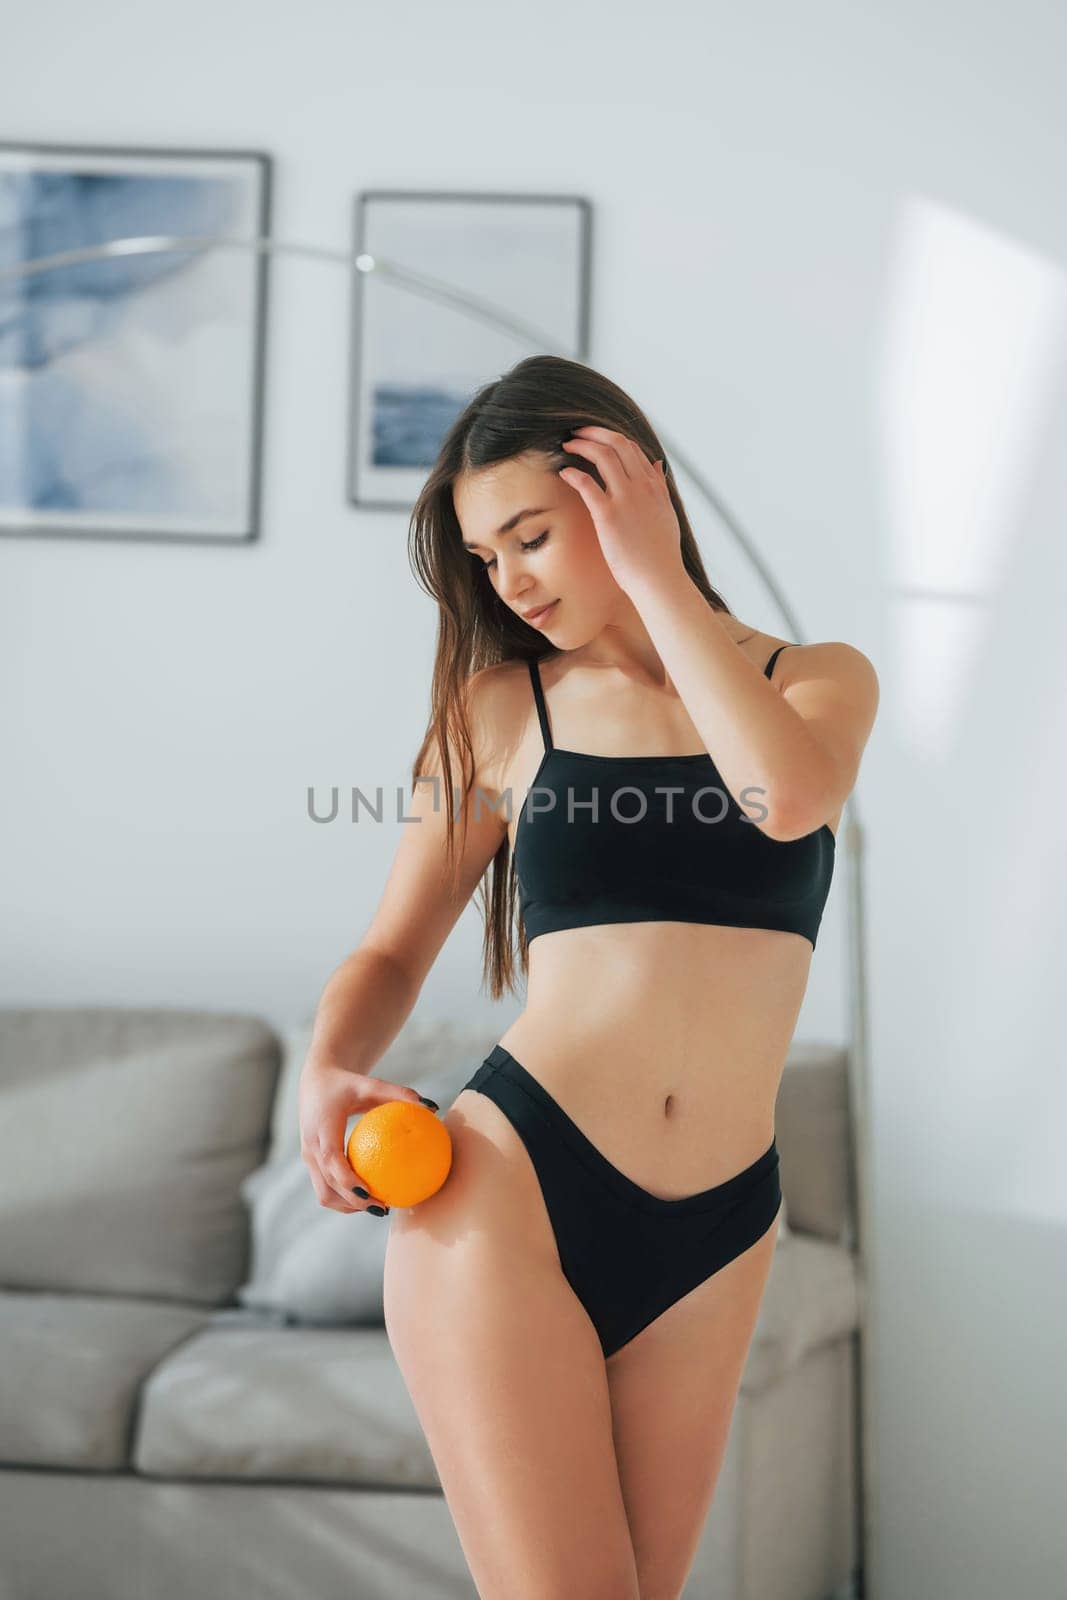 With orange in hand. Beautiful woman in underwear is posing indoors by Standret